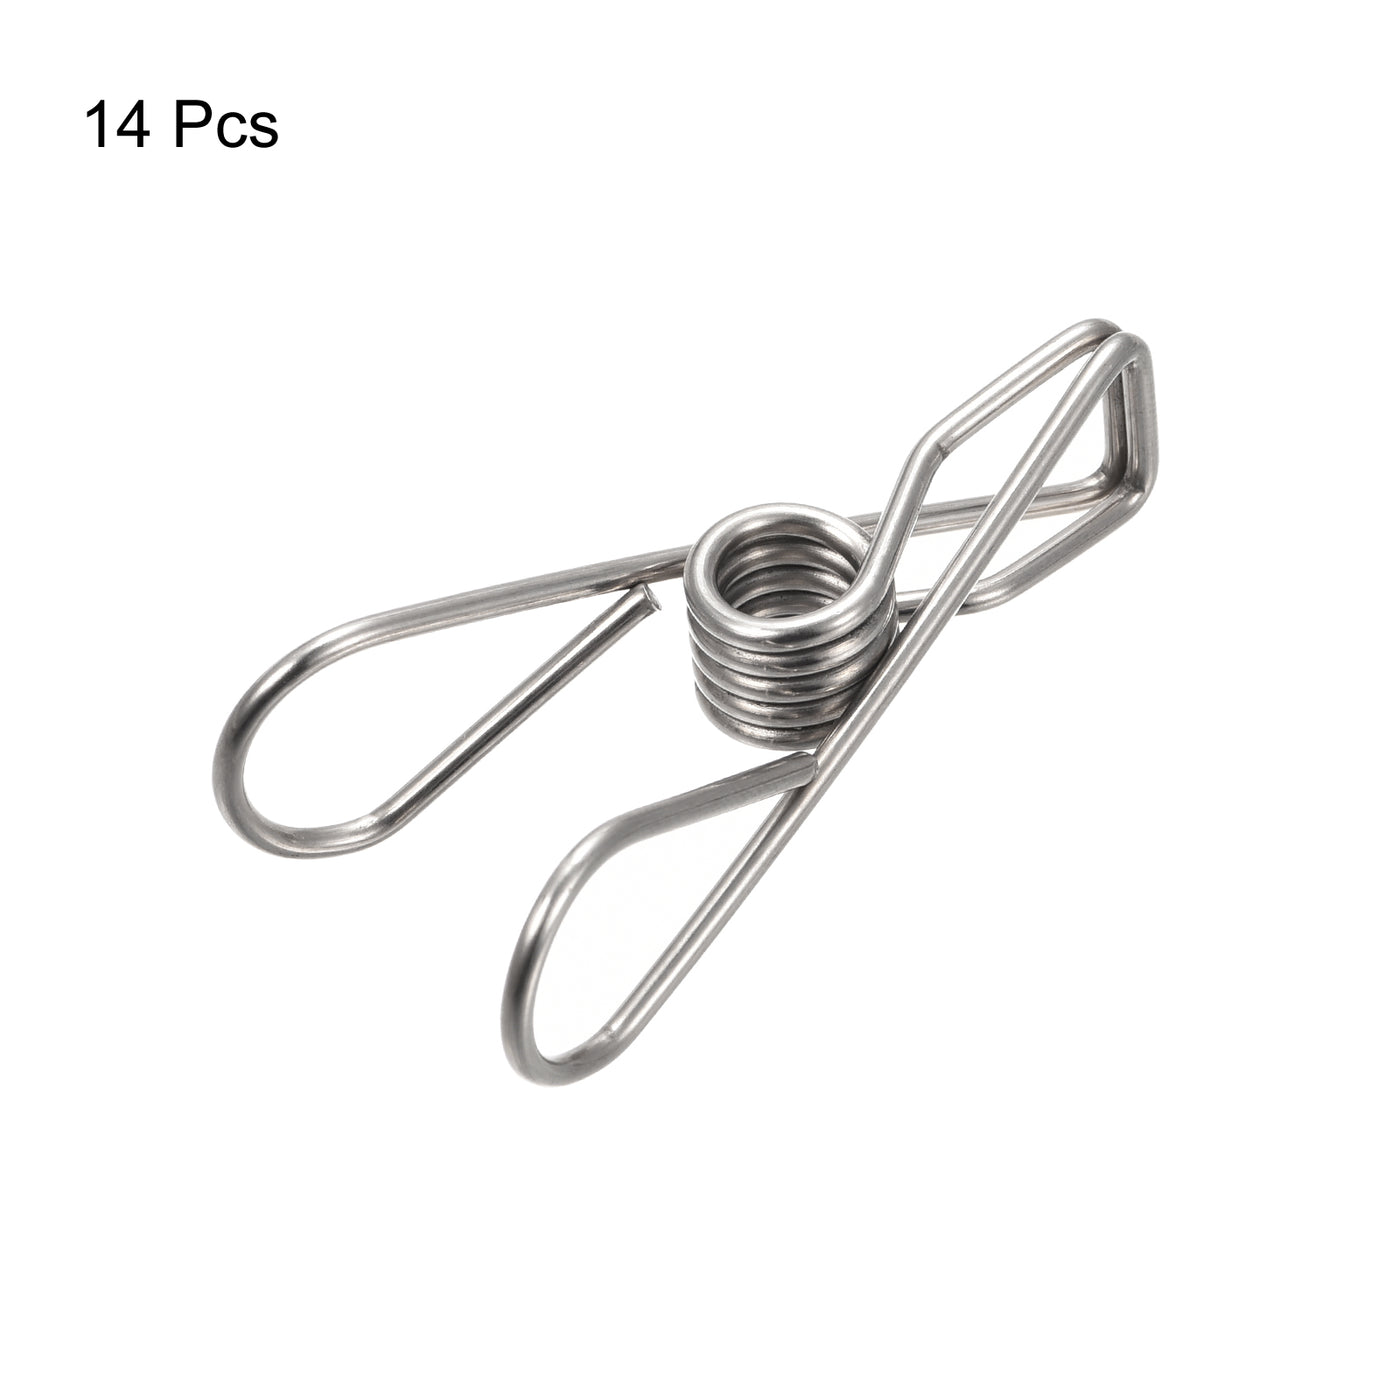 uxcell Uxcell Tablecloth Clips - 50mm Stainless Steel Wire Clamps for Fixing Table Cloth Hanging Clothes, 14 Pcs